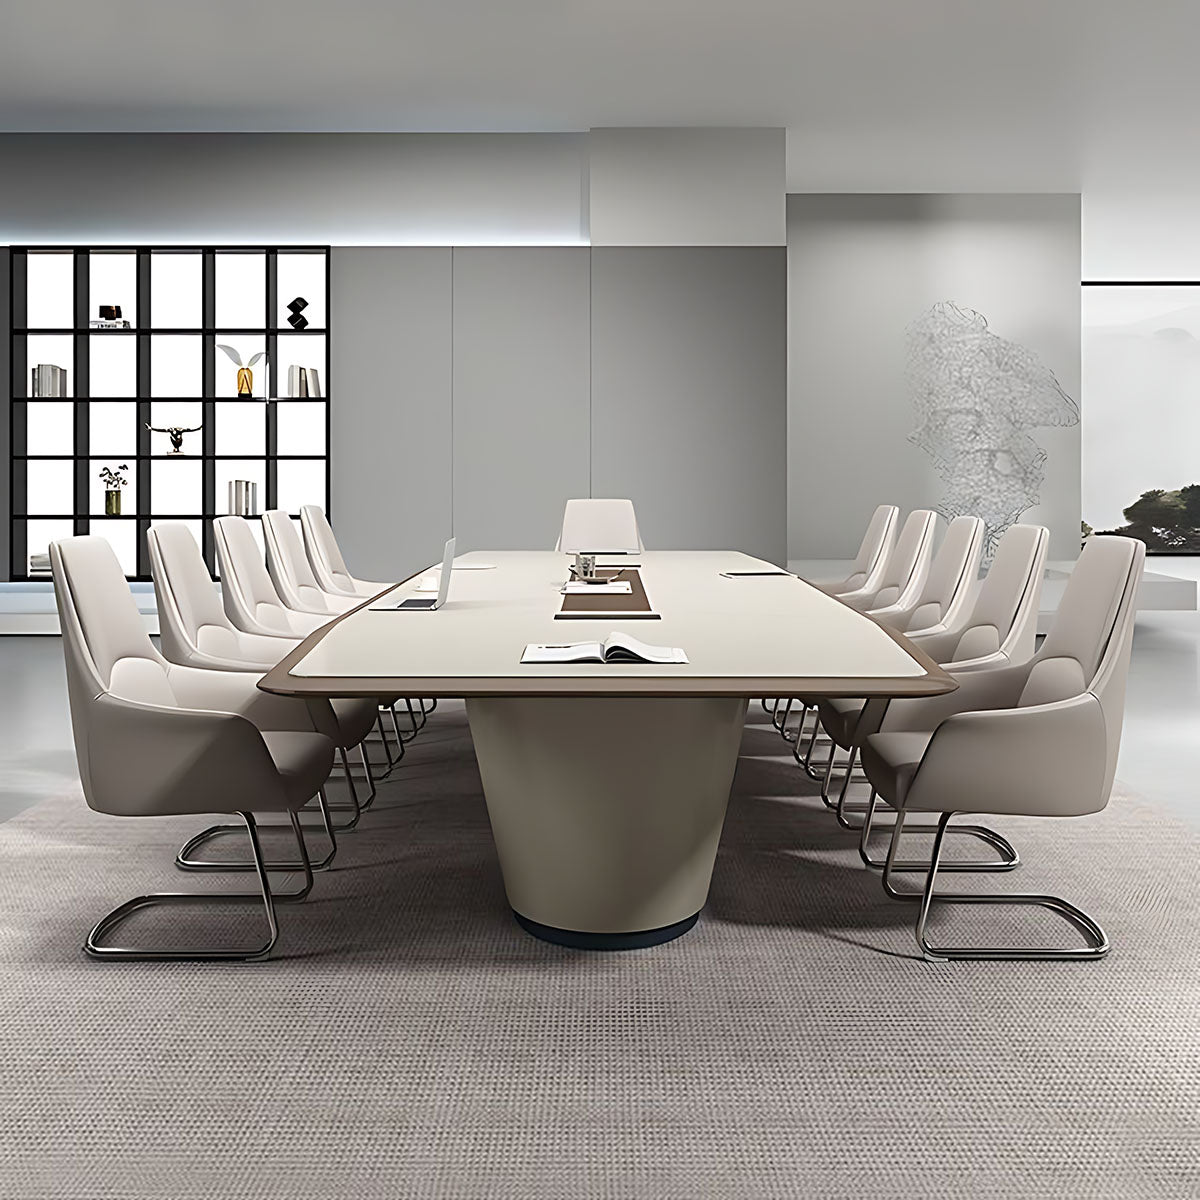 Light Luxury Long table Modern High-grade Lacquered Conference Table